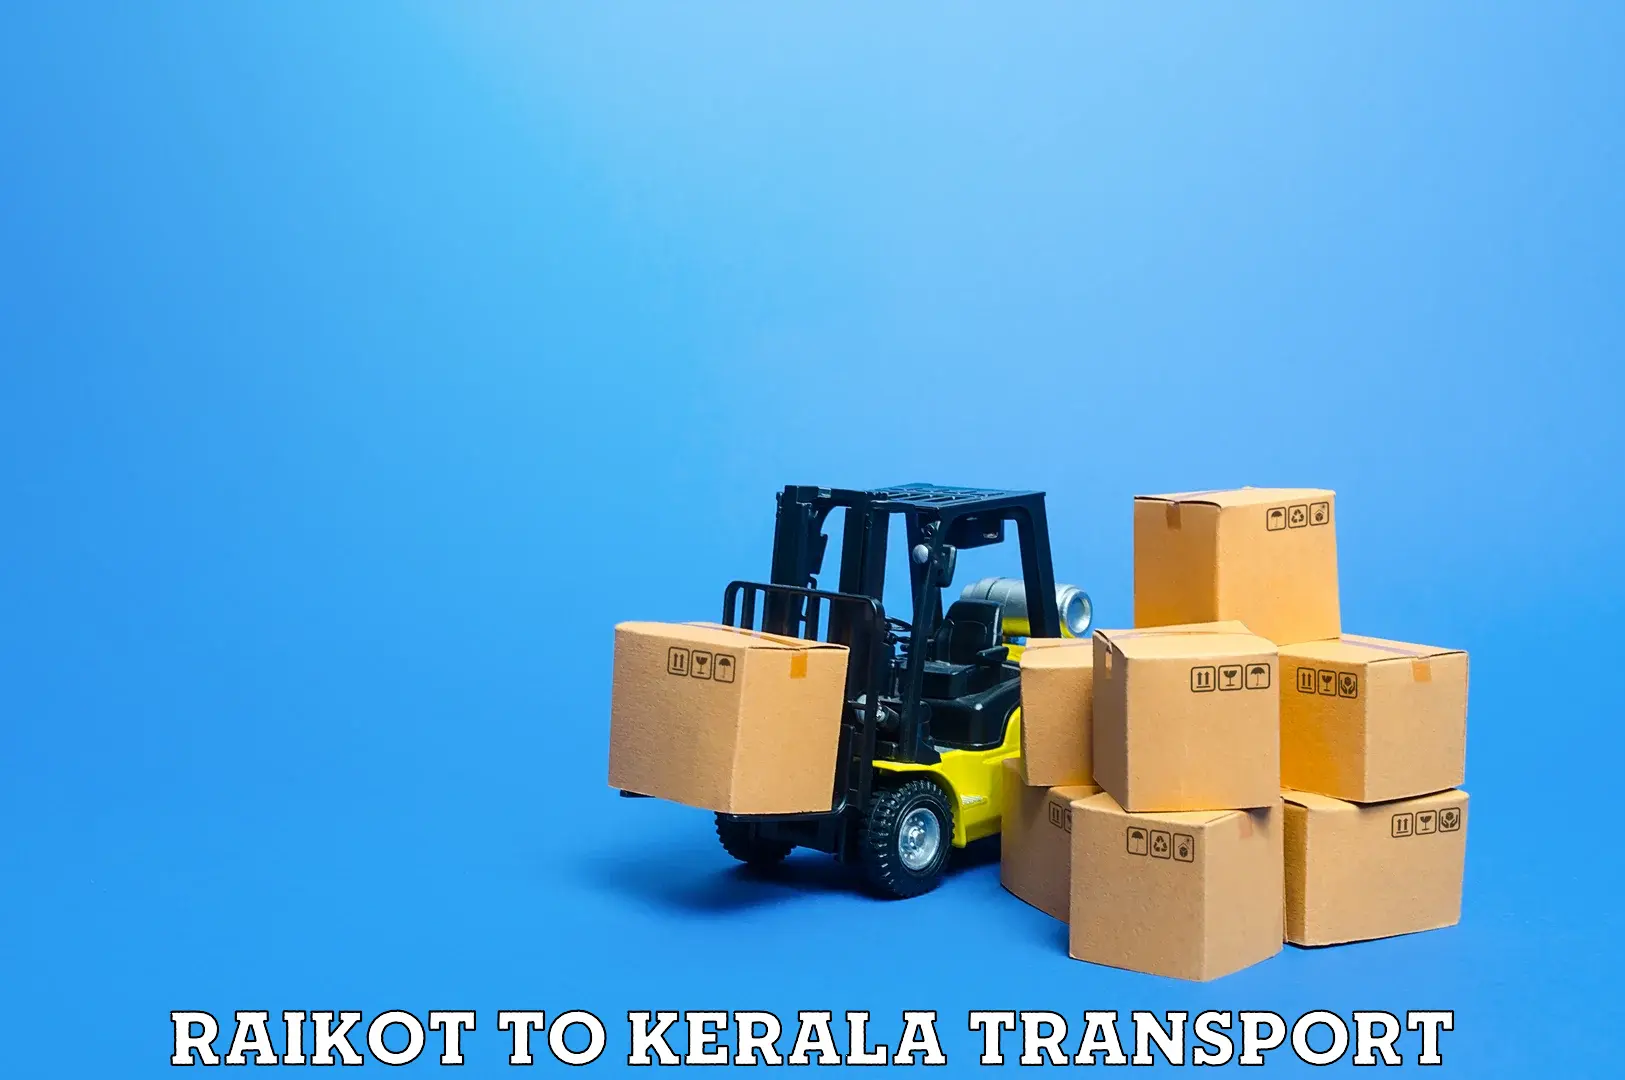 Container transport service Raikot to Kerala